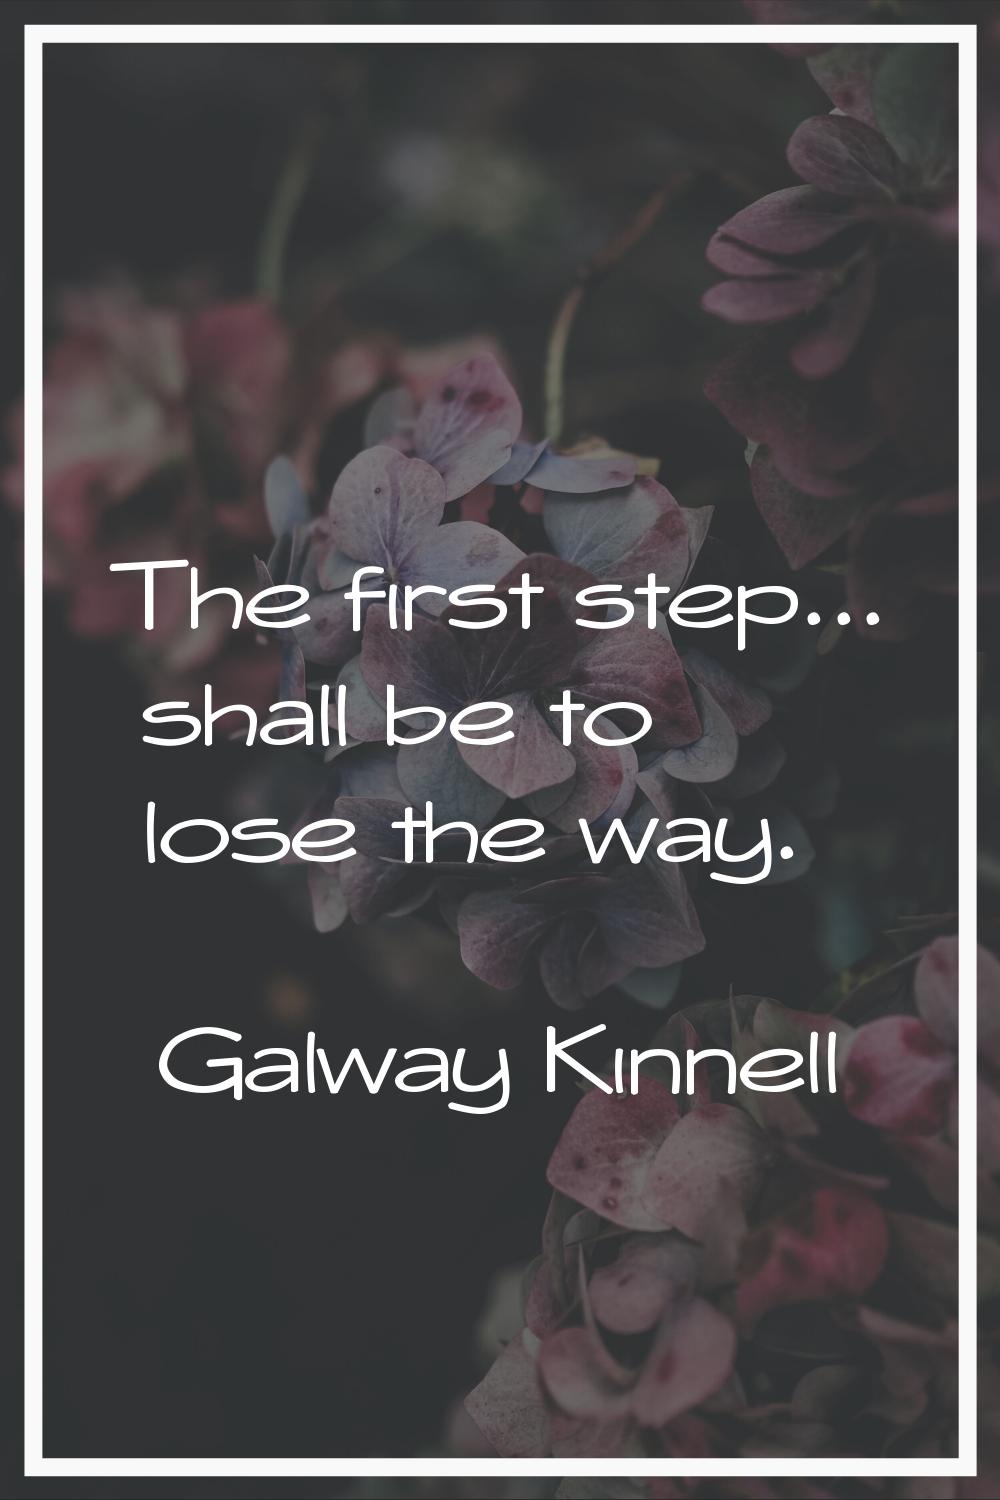 The first step... shall be to lose the way.